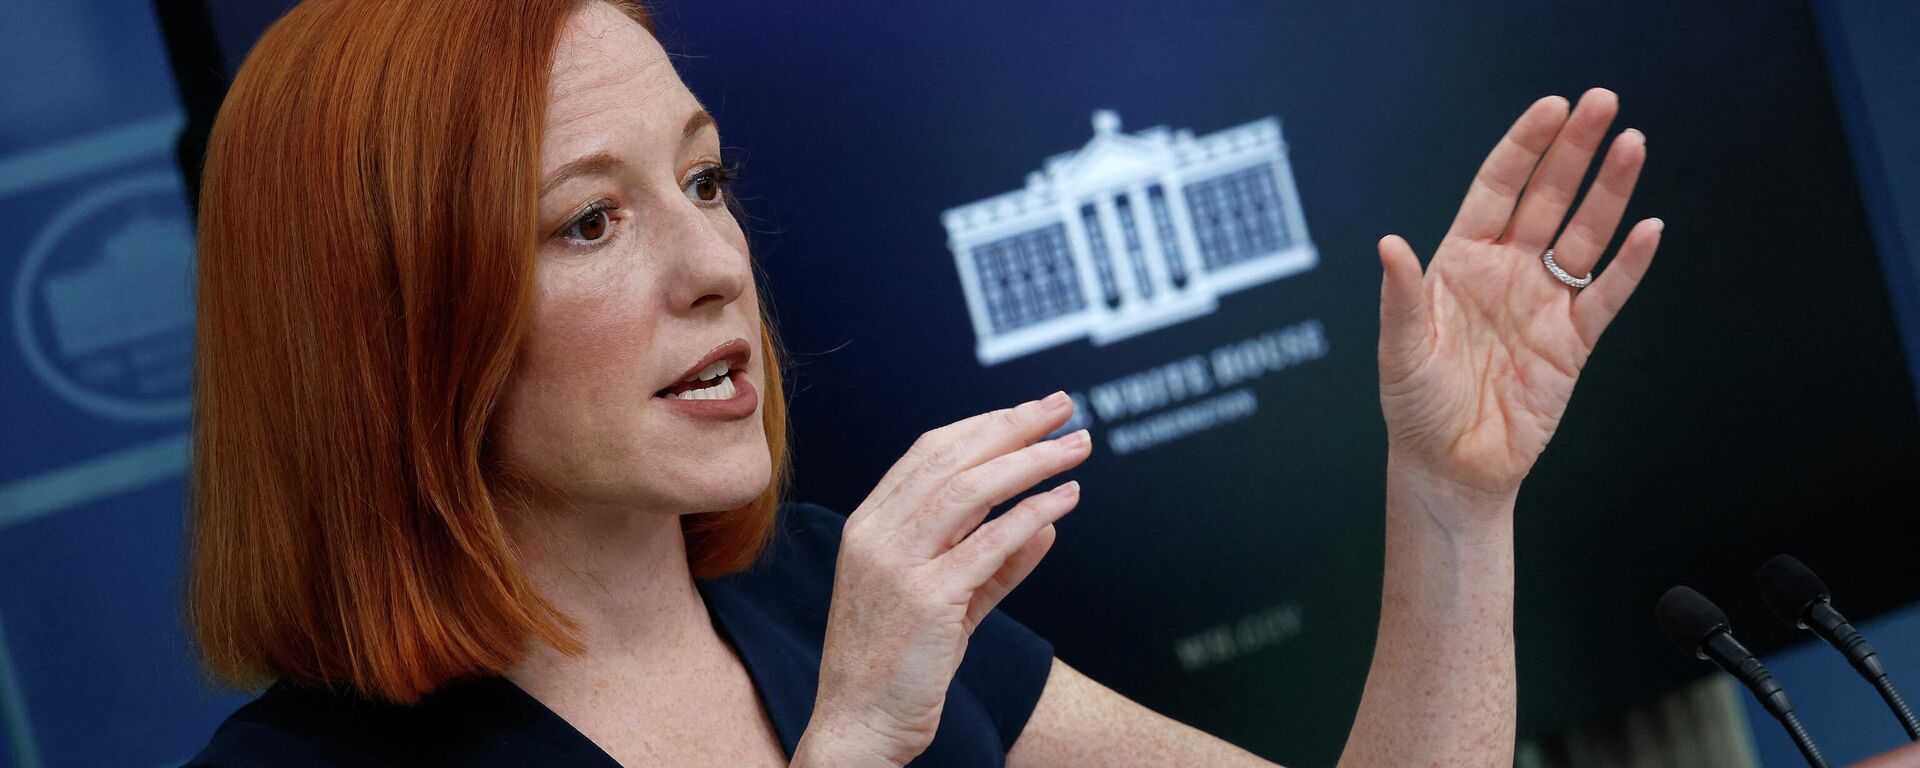 White House Press Secretary Jen Psaki talks to reporters during the daily news conference in the Brady Press Briefing Room at the White House on April 08, 2022 in Washington, DC - Sputnik International, 1920, 21.04.2022